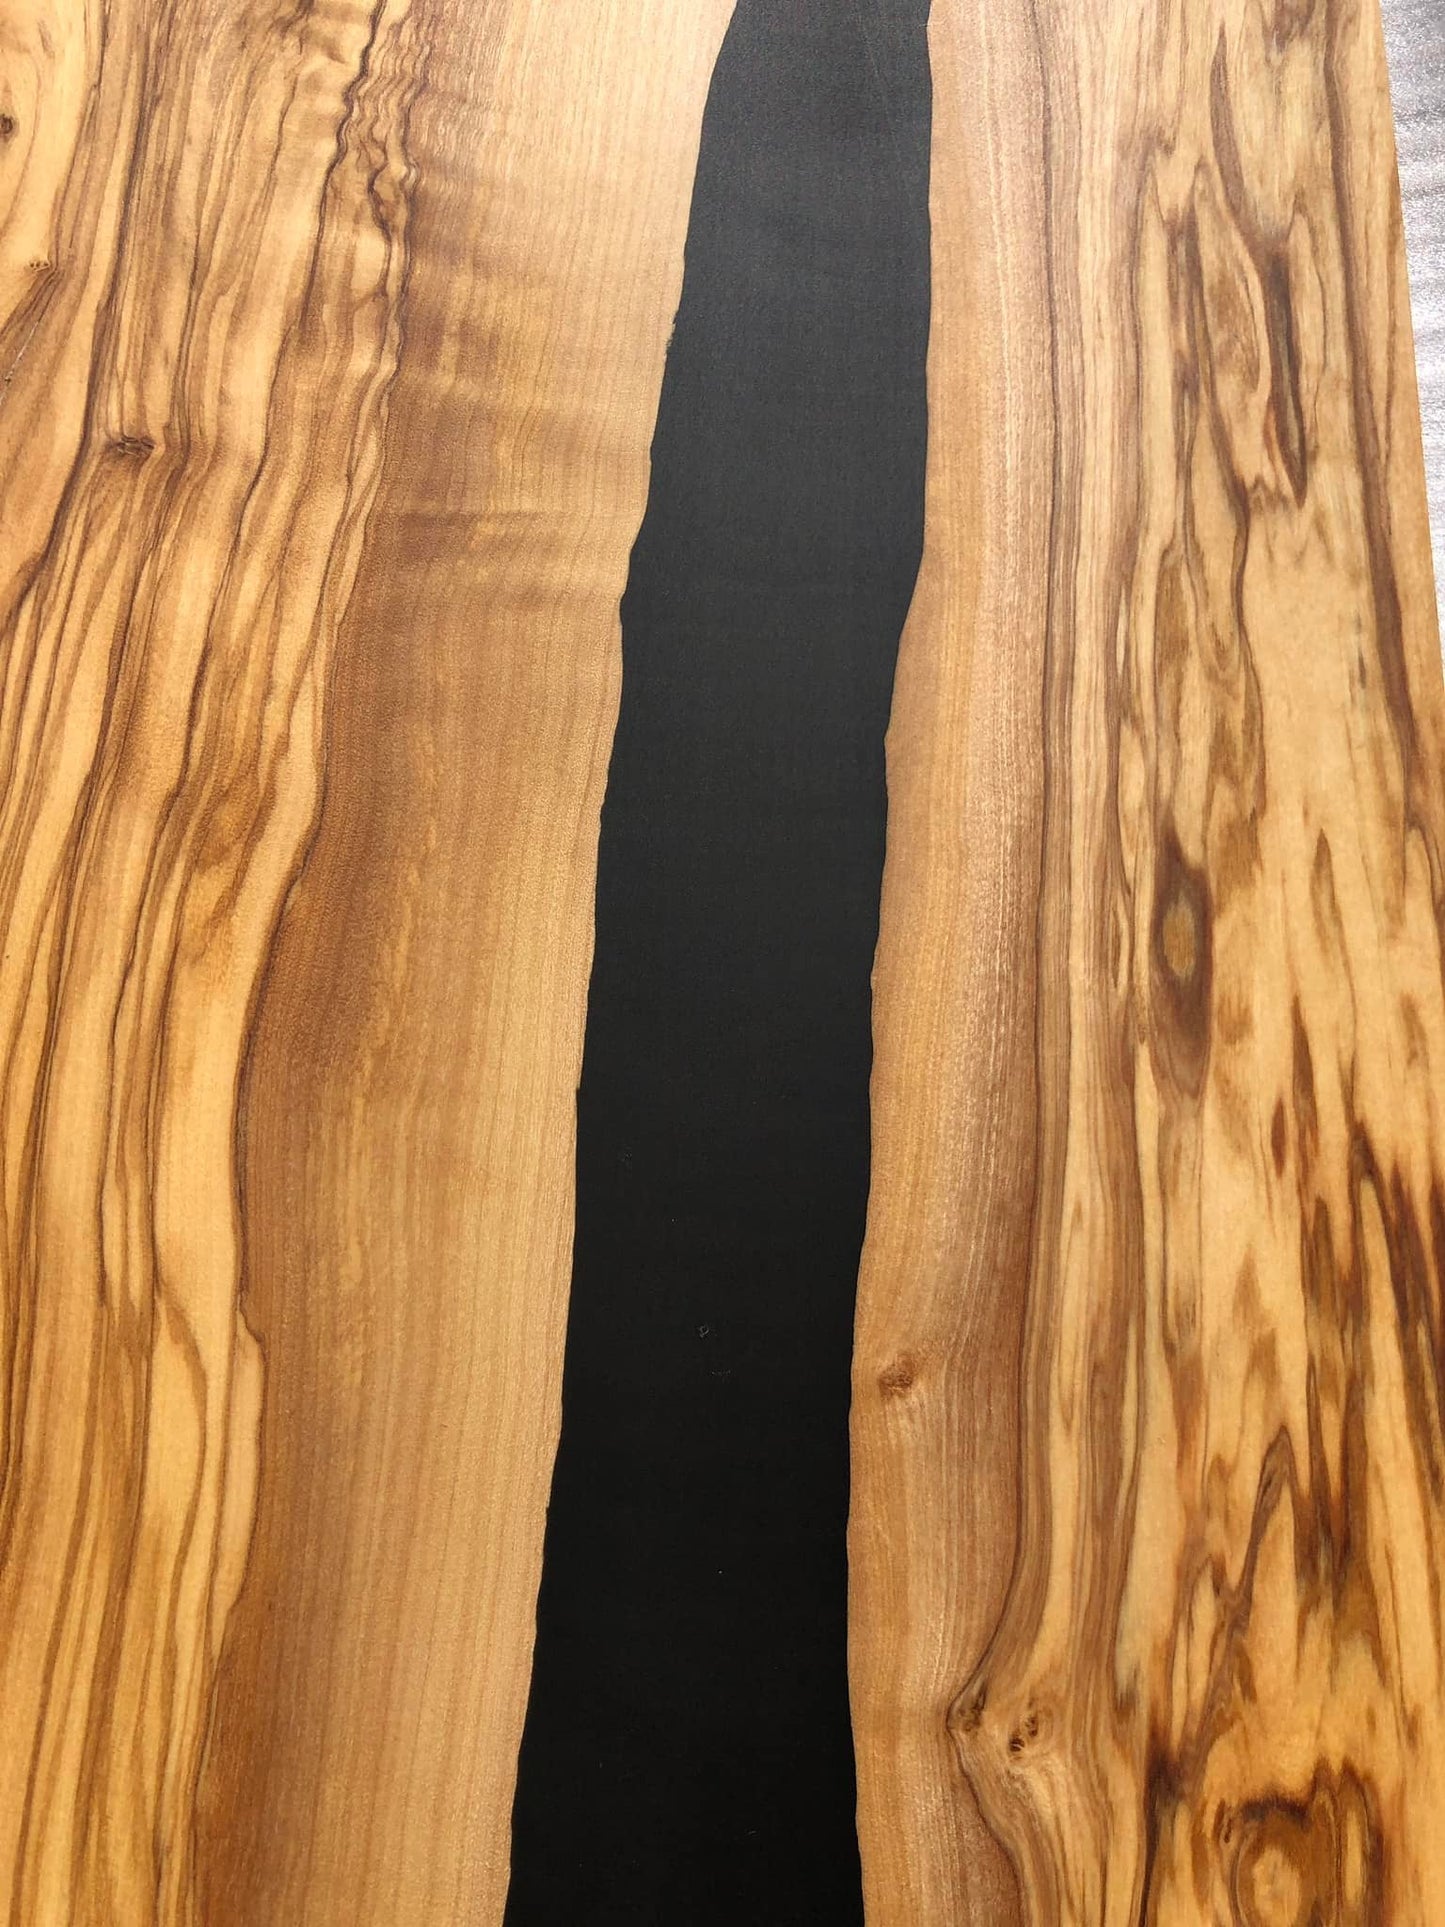 Case Rates - Black Resin & Olive Wood Boards - 46x23cm (18.1x9.06in) - Pennsylvania